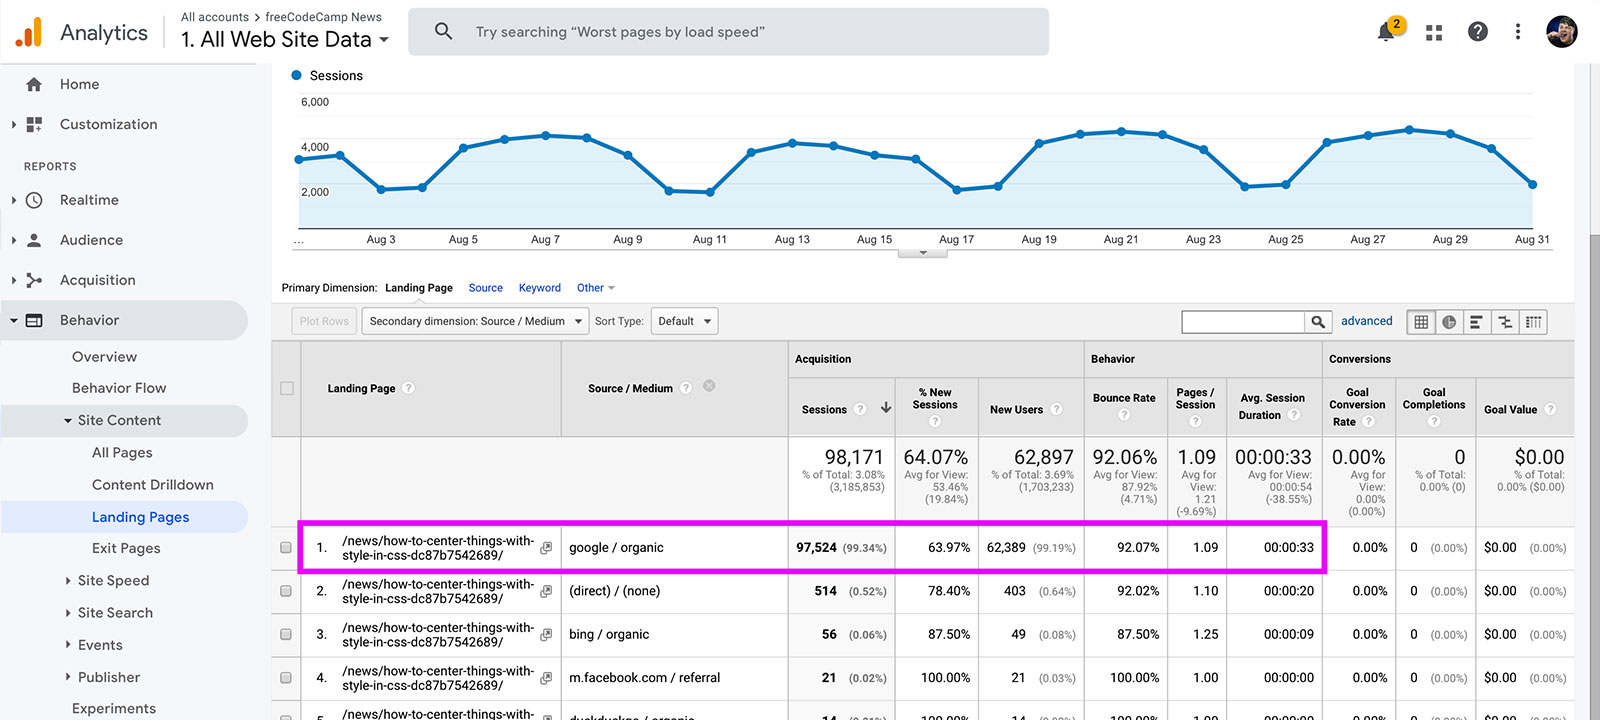 Finding the top Source / Medium on the Google Analytics Landing Page Report